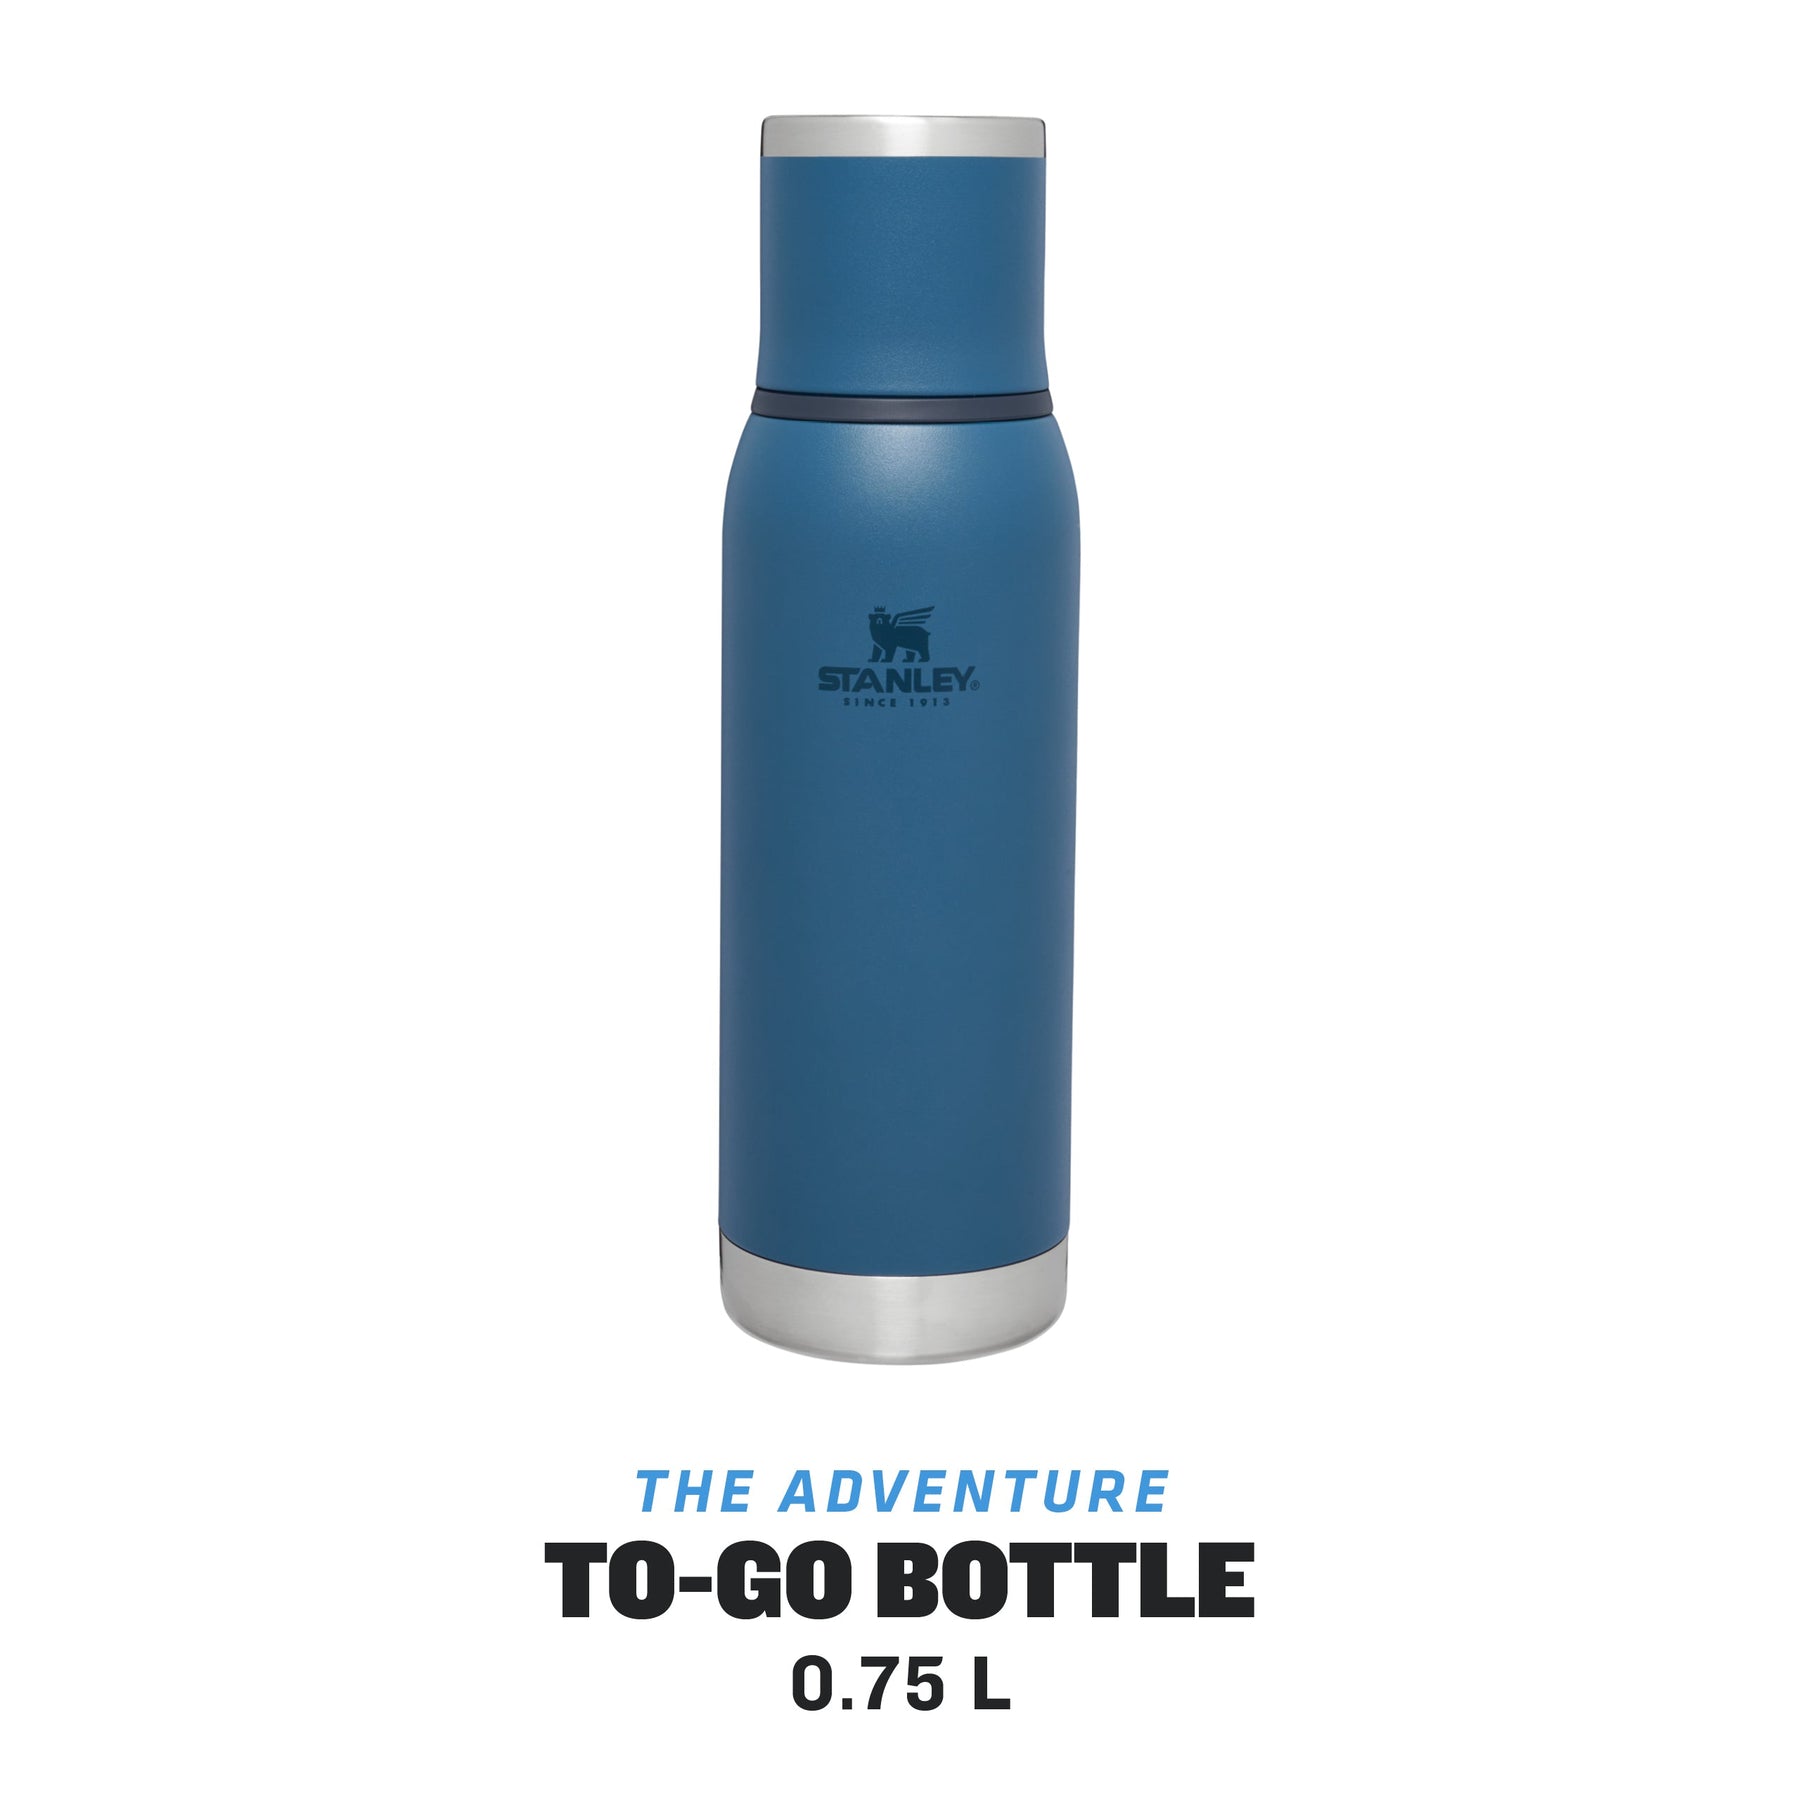 https://cdn.shopify.com/s/files/1/0516/4564/5000/products/TheAdventureTo-GoBottle0.75L-25oz-Abyss-ProductName_1800x1800.jpg?v=1702666322